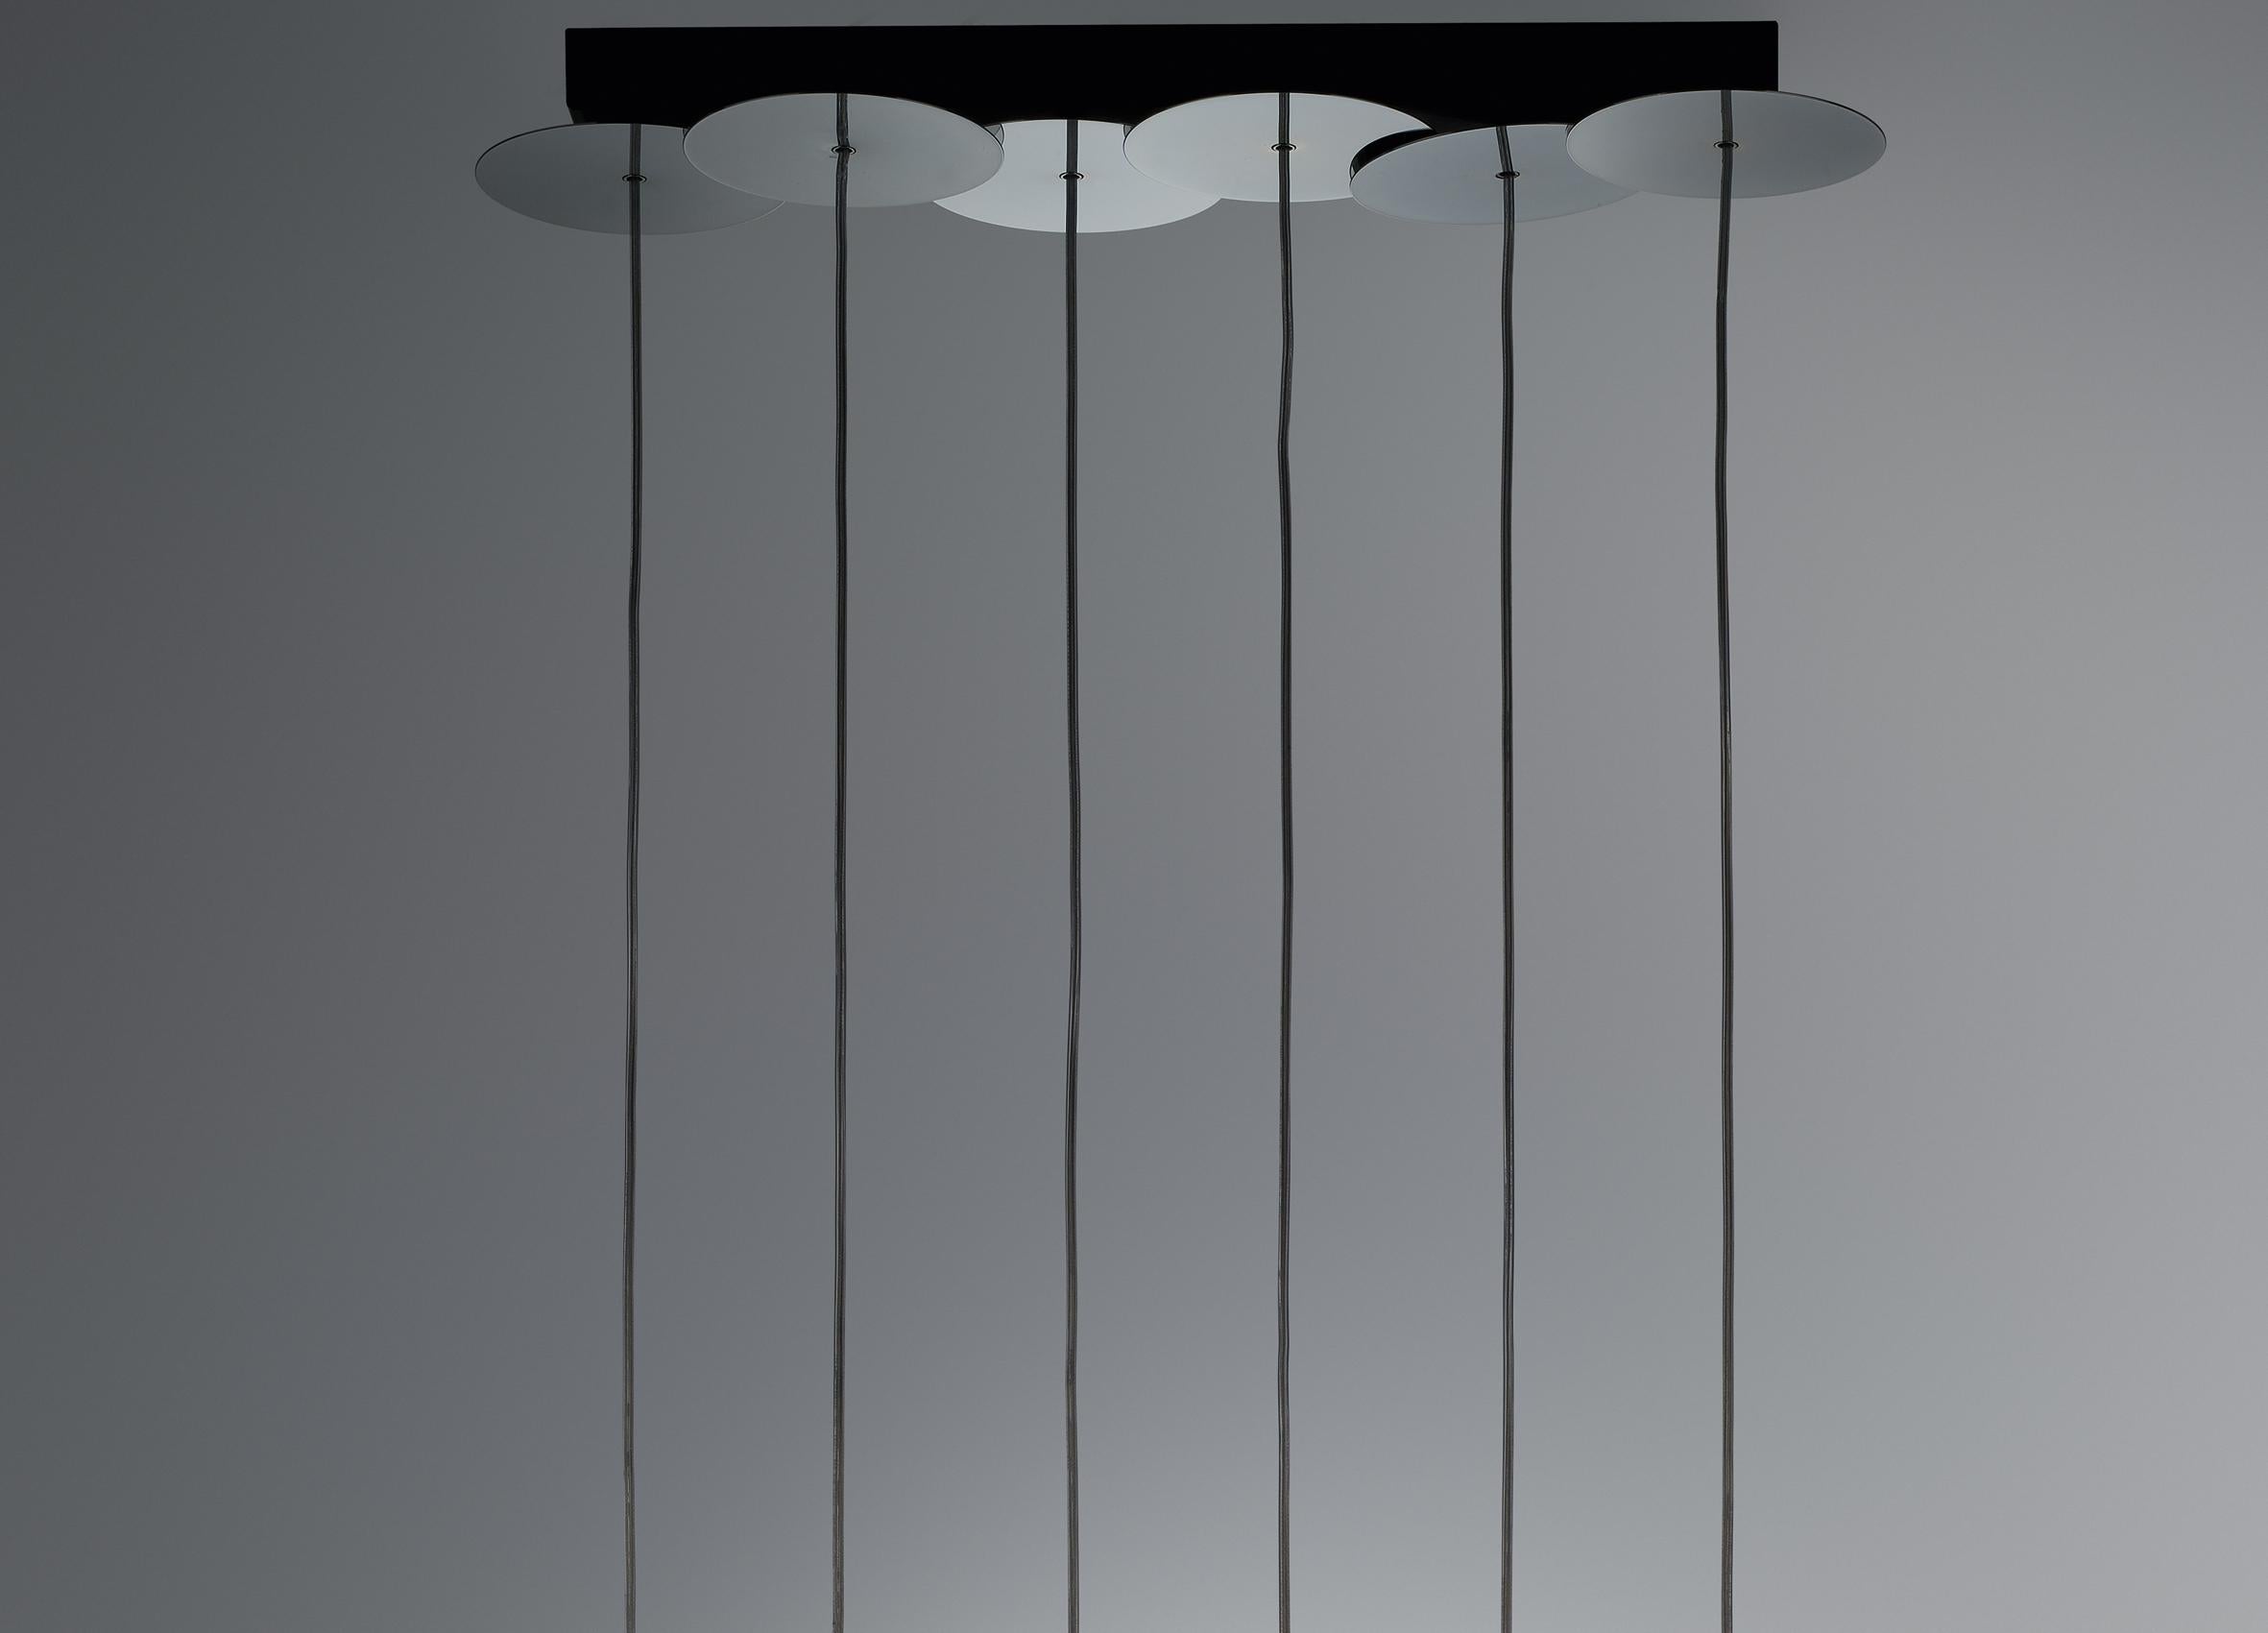 Axolight Spillray 6 Light Pendant Lamp with Chrome Metal Body in Crystal by Manuel & Vanessa Vivian

The delicacy of the glass expresses a pure but gently refined light. With its clean and essential design, Spillray is able to illuminate any space